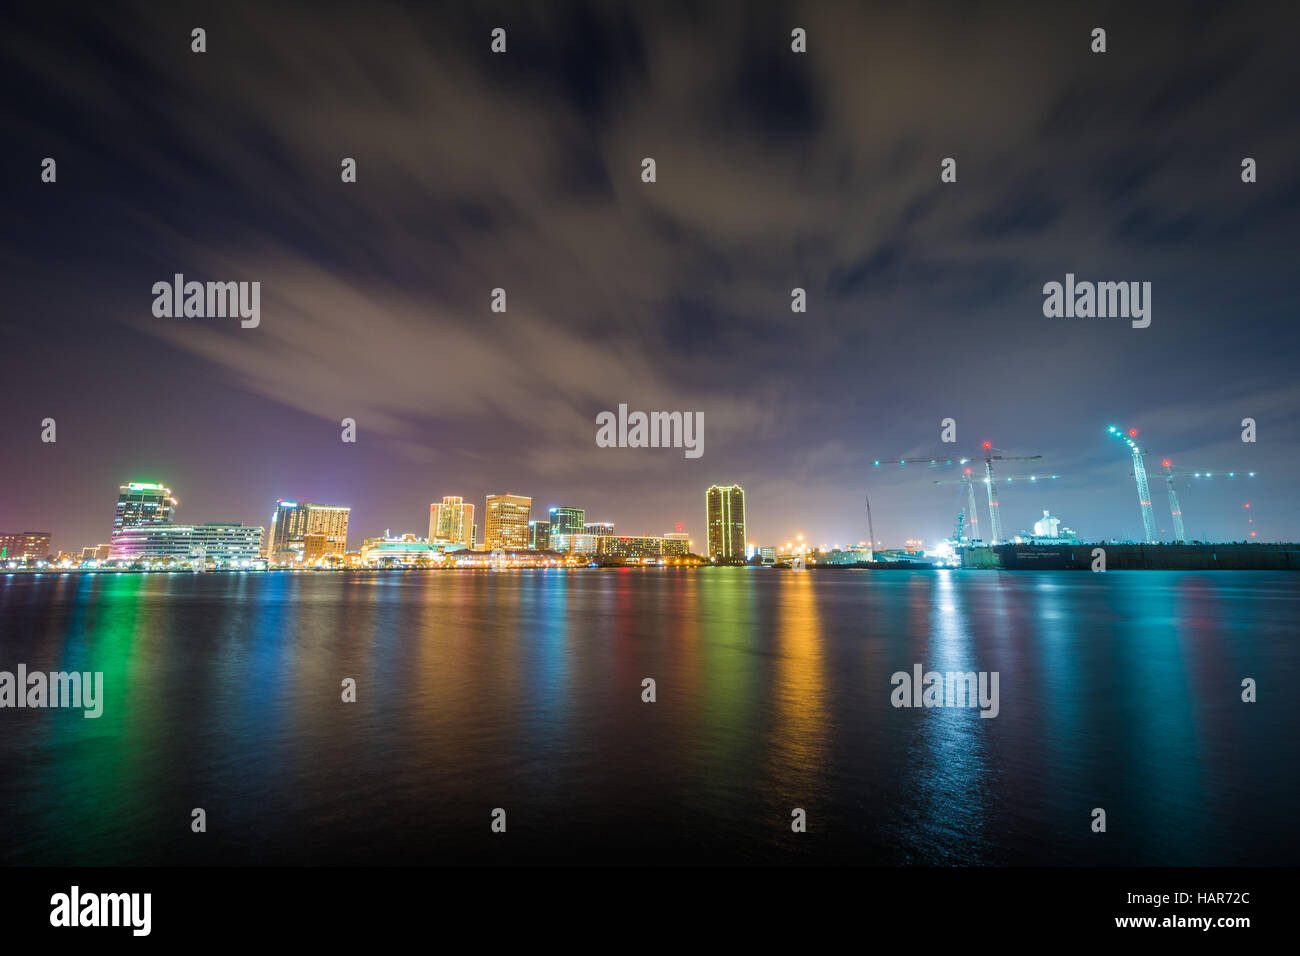 The skyline of Norfolk at night, seen from the waterfront in Portsmouth, Virginia. Stock Photo